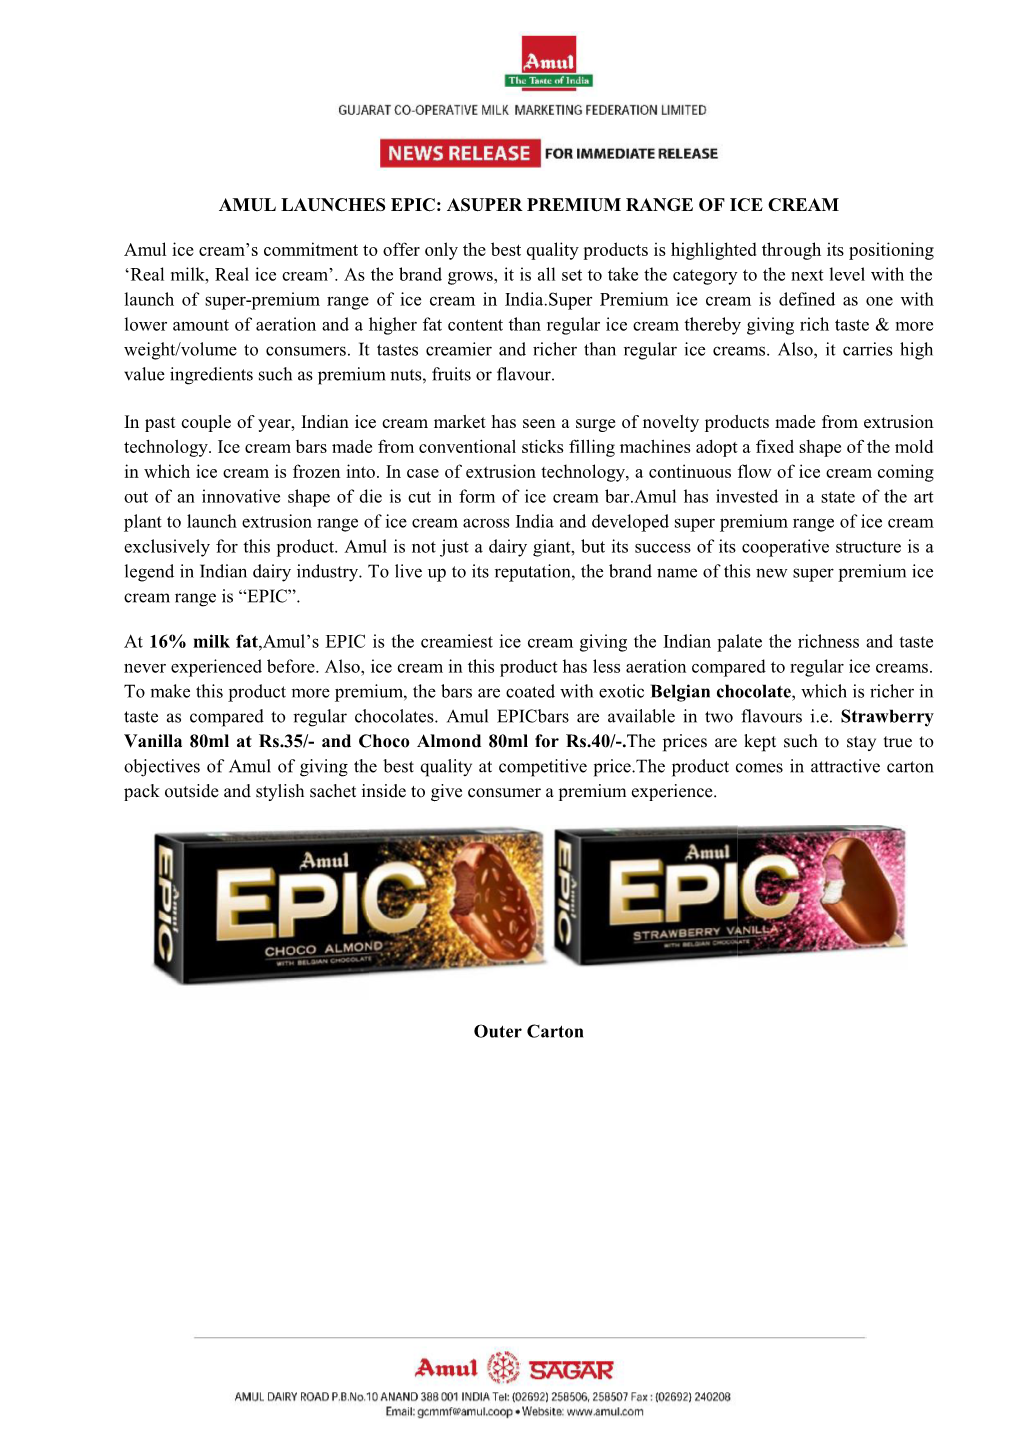 AMUL LAUNCHES EPIC: AS Amul Ice Cream's Commitment to Offer Only T